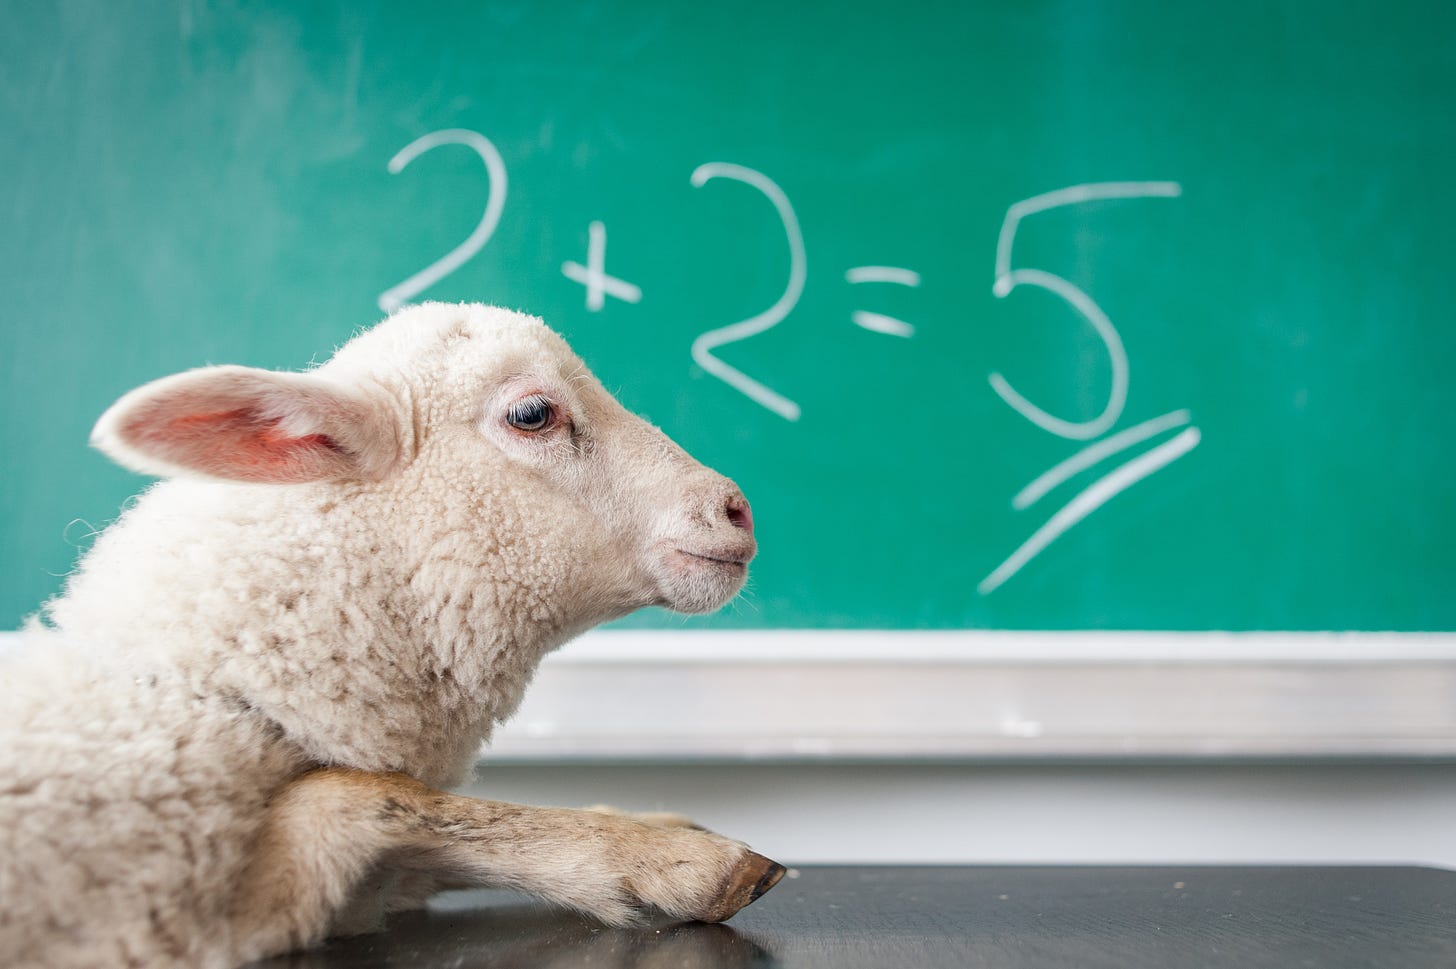 A sheep in front of a blackboard that says 2+2=5